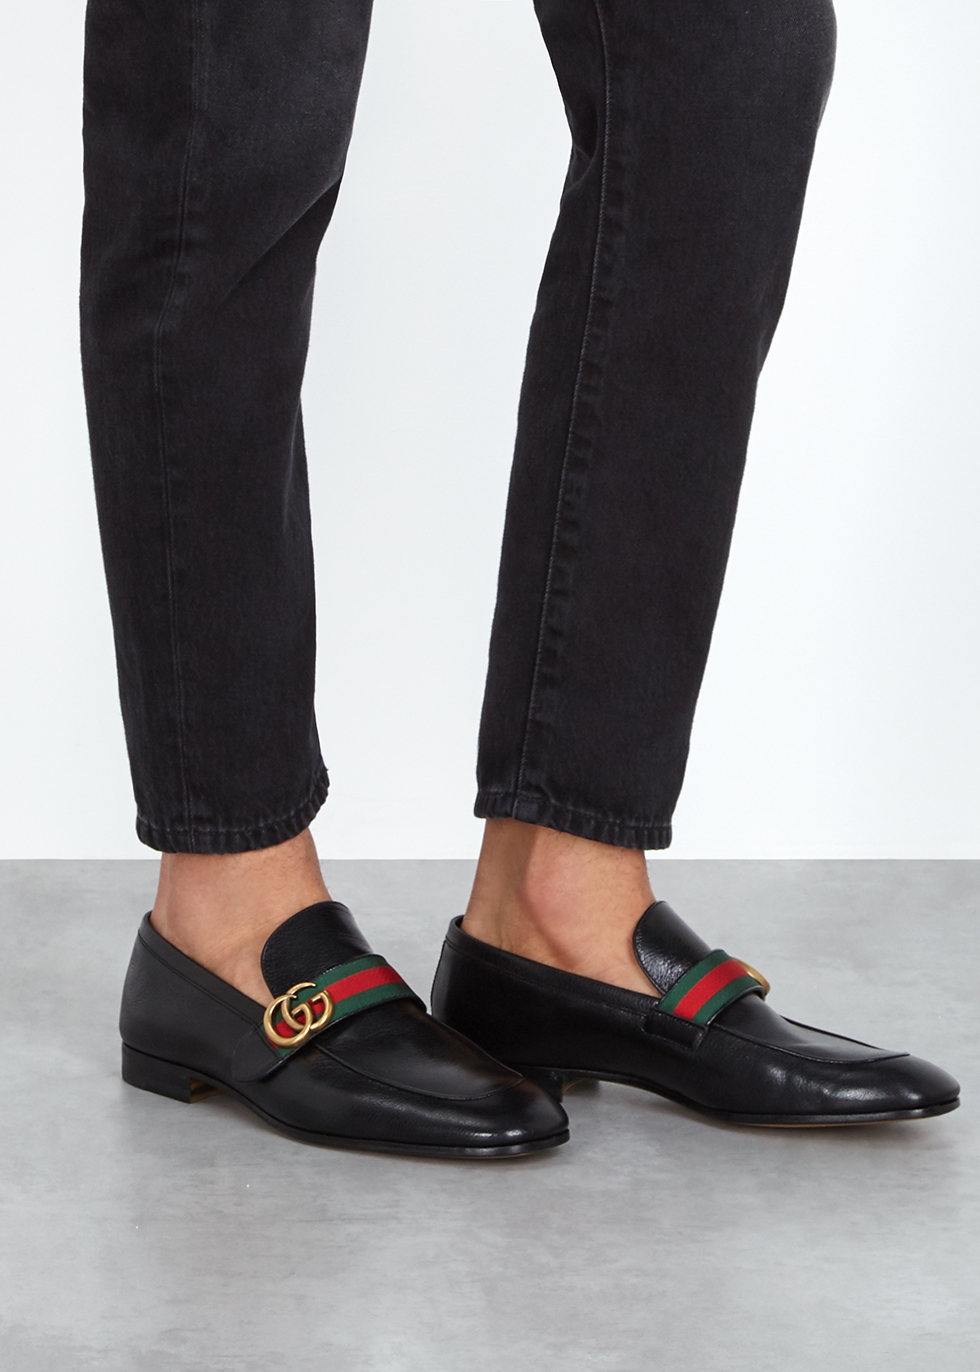 Gucci Donnie black leather loafers 